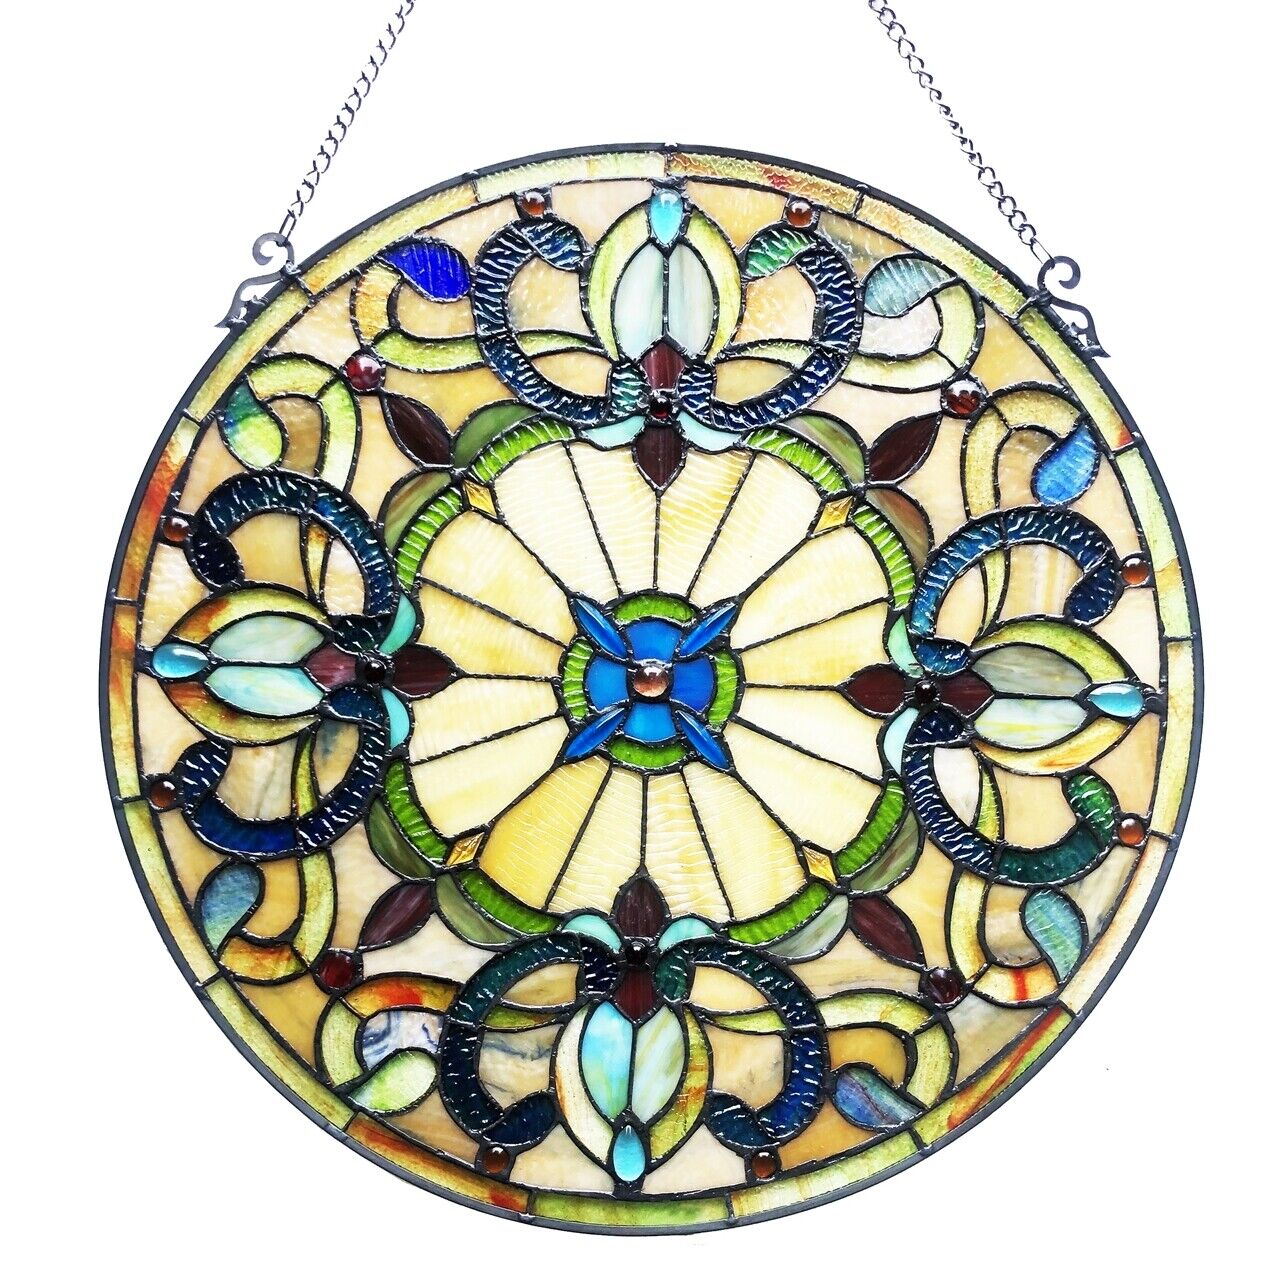 Antique Vintage Style 22" Round Stained Glass Window Hanging Panel Suncatcher